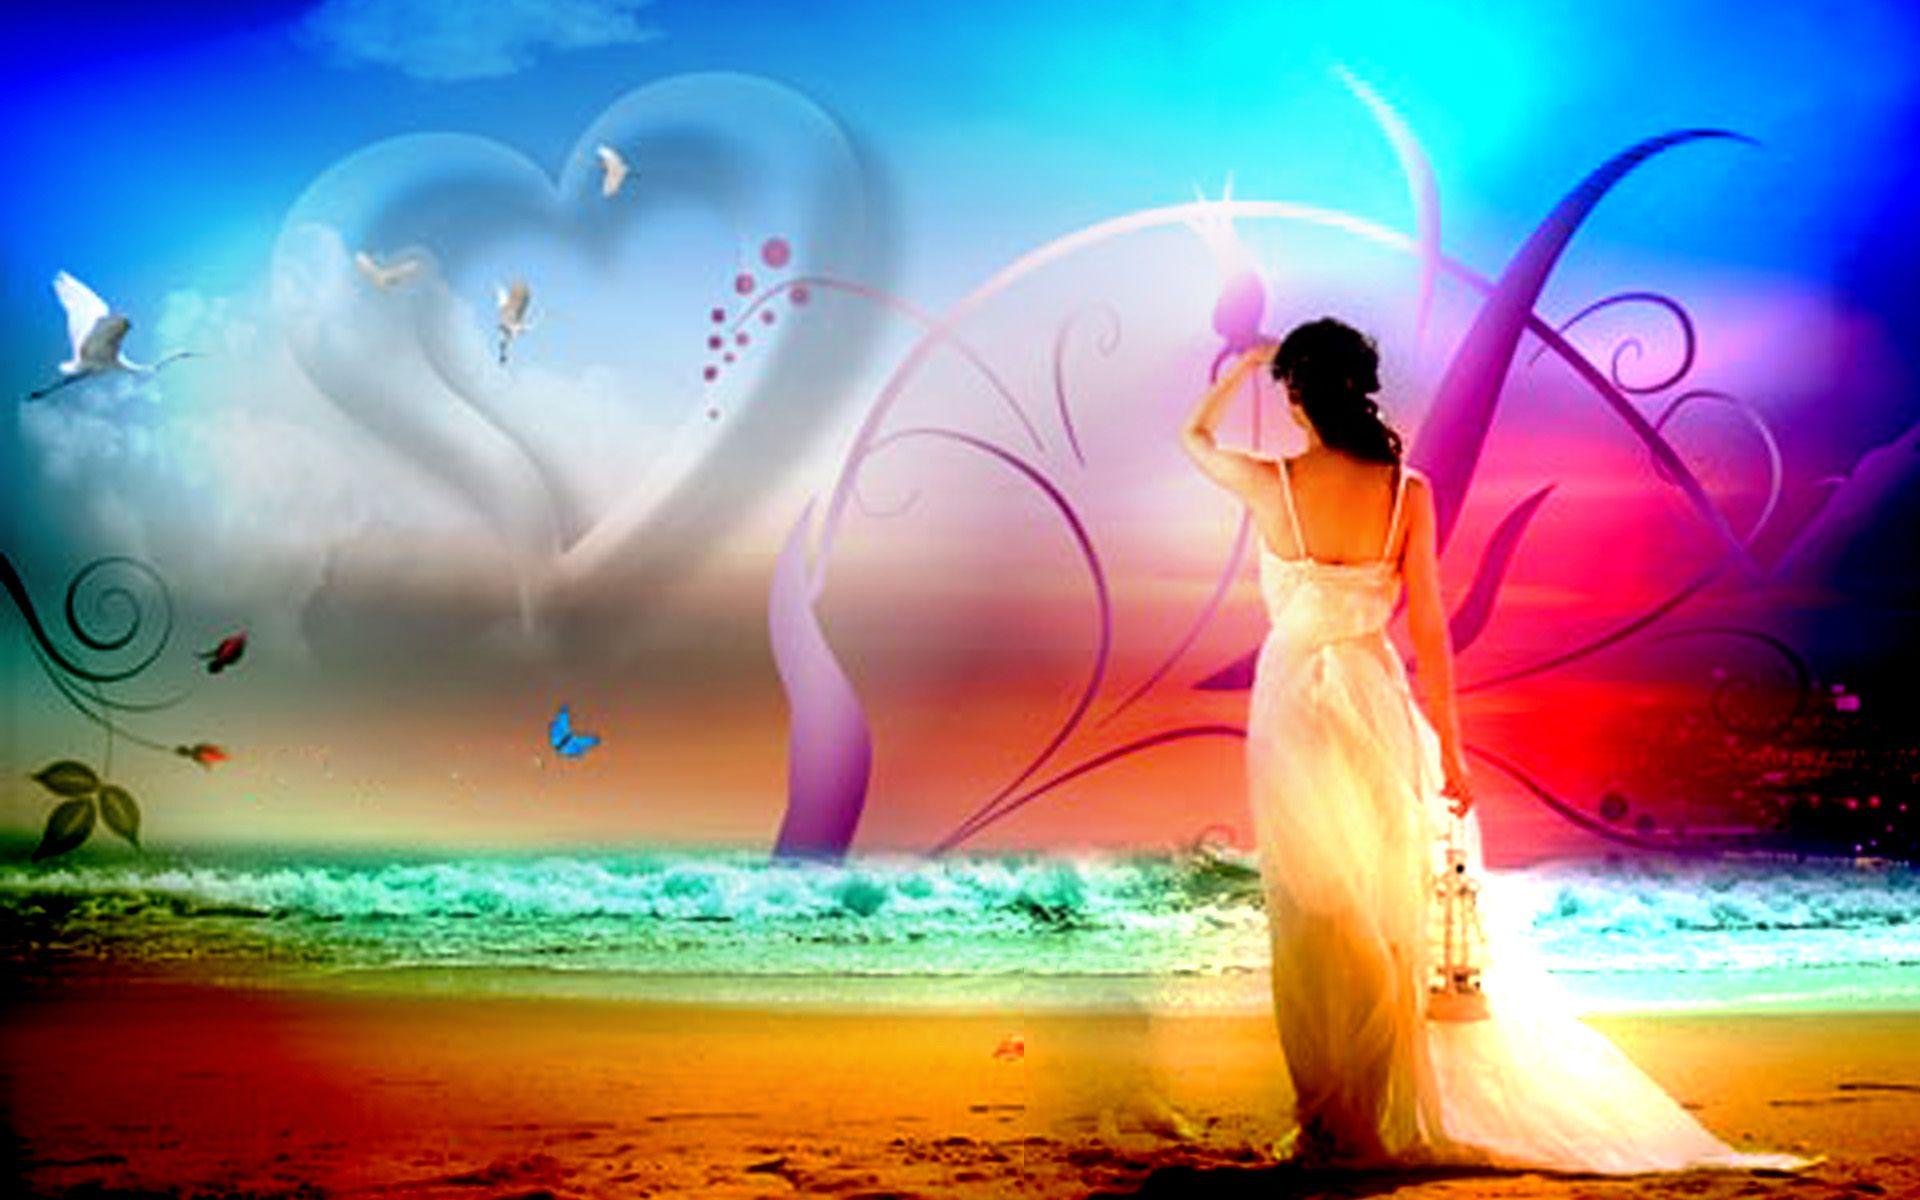 Beautiful Romantic Love HD Wallpapers For Couples - Let Us Publish